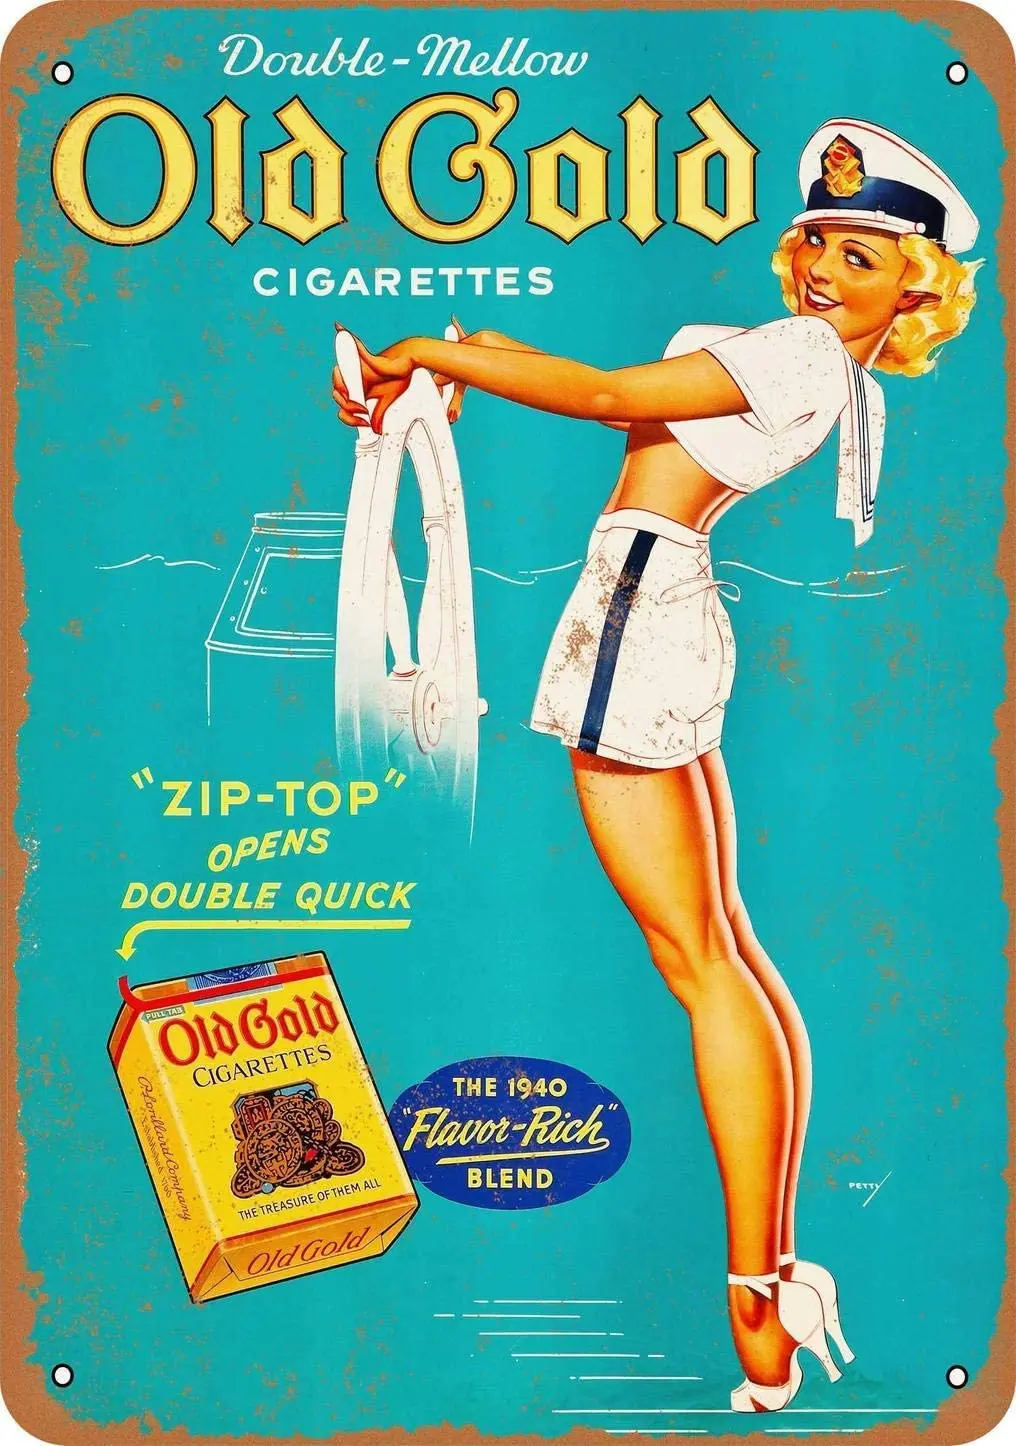 

Retro Tin Signs 20x30 cm Old Gold Cigarettes Pin-Up Vintage Look Metal Sign Home Decor 8x12 Inch